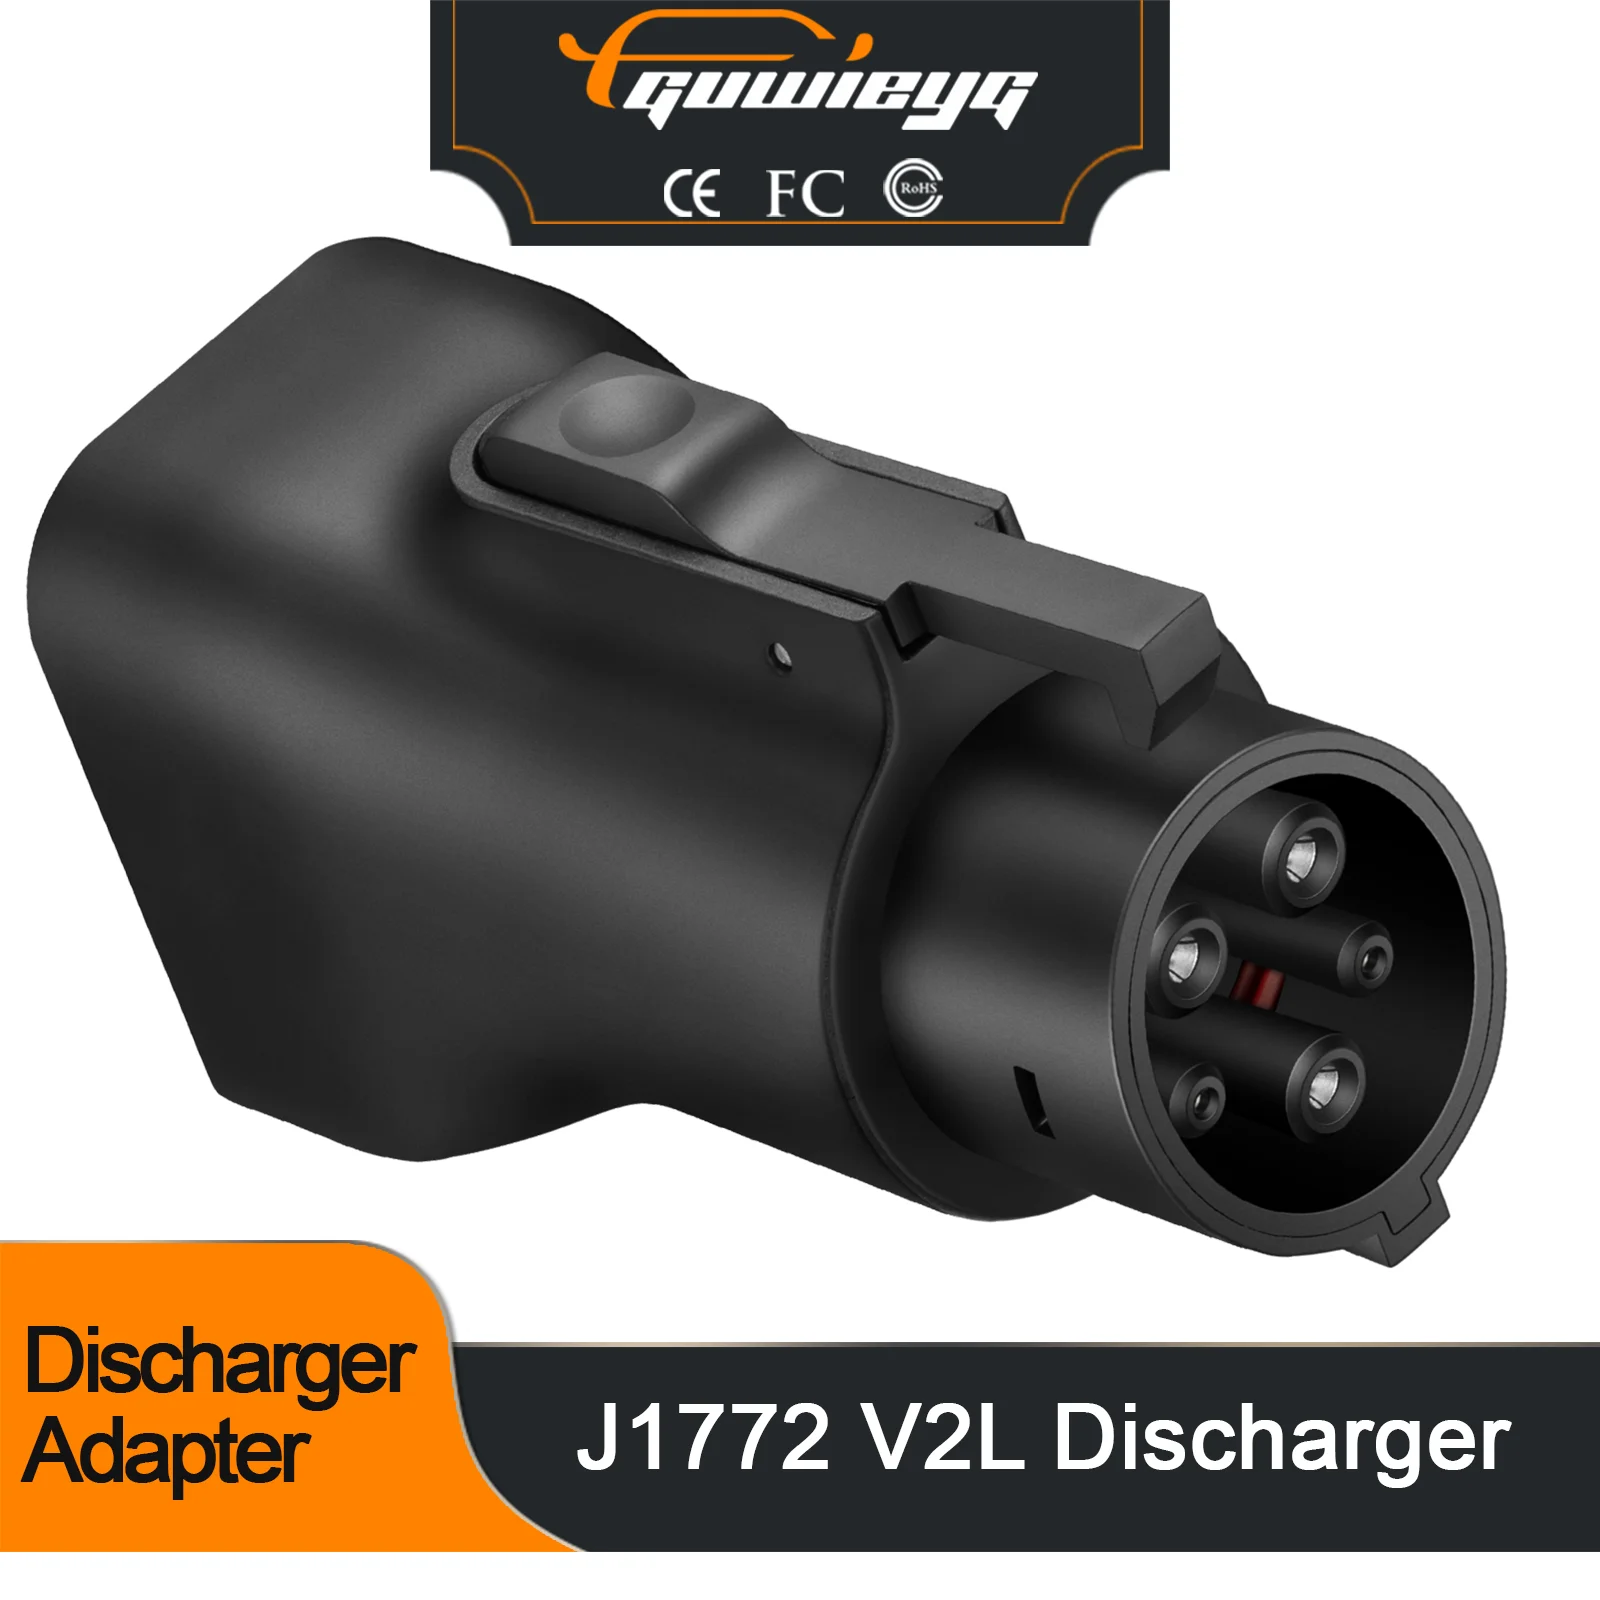 

J1772 V2L Discharger For Type1 Car Discharge EV Cable Adapter Support Hyundai Kia Genesis Ford For type1 vehicle V2L